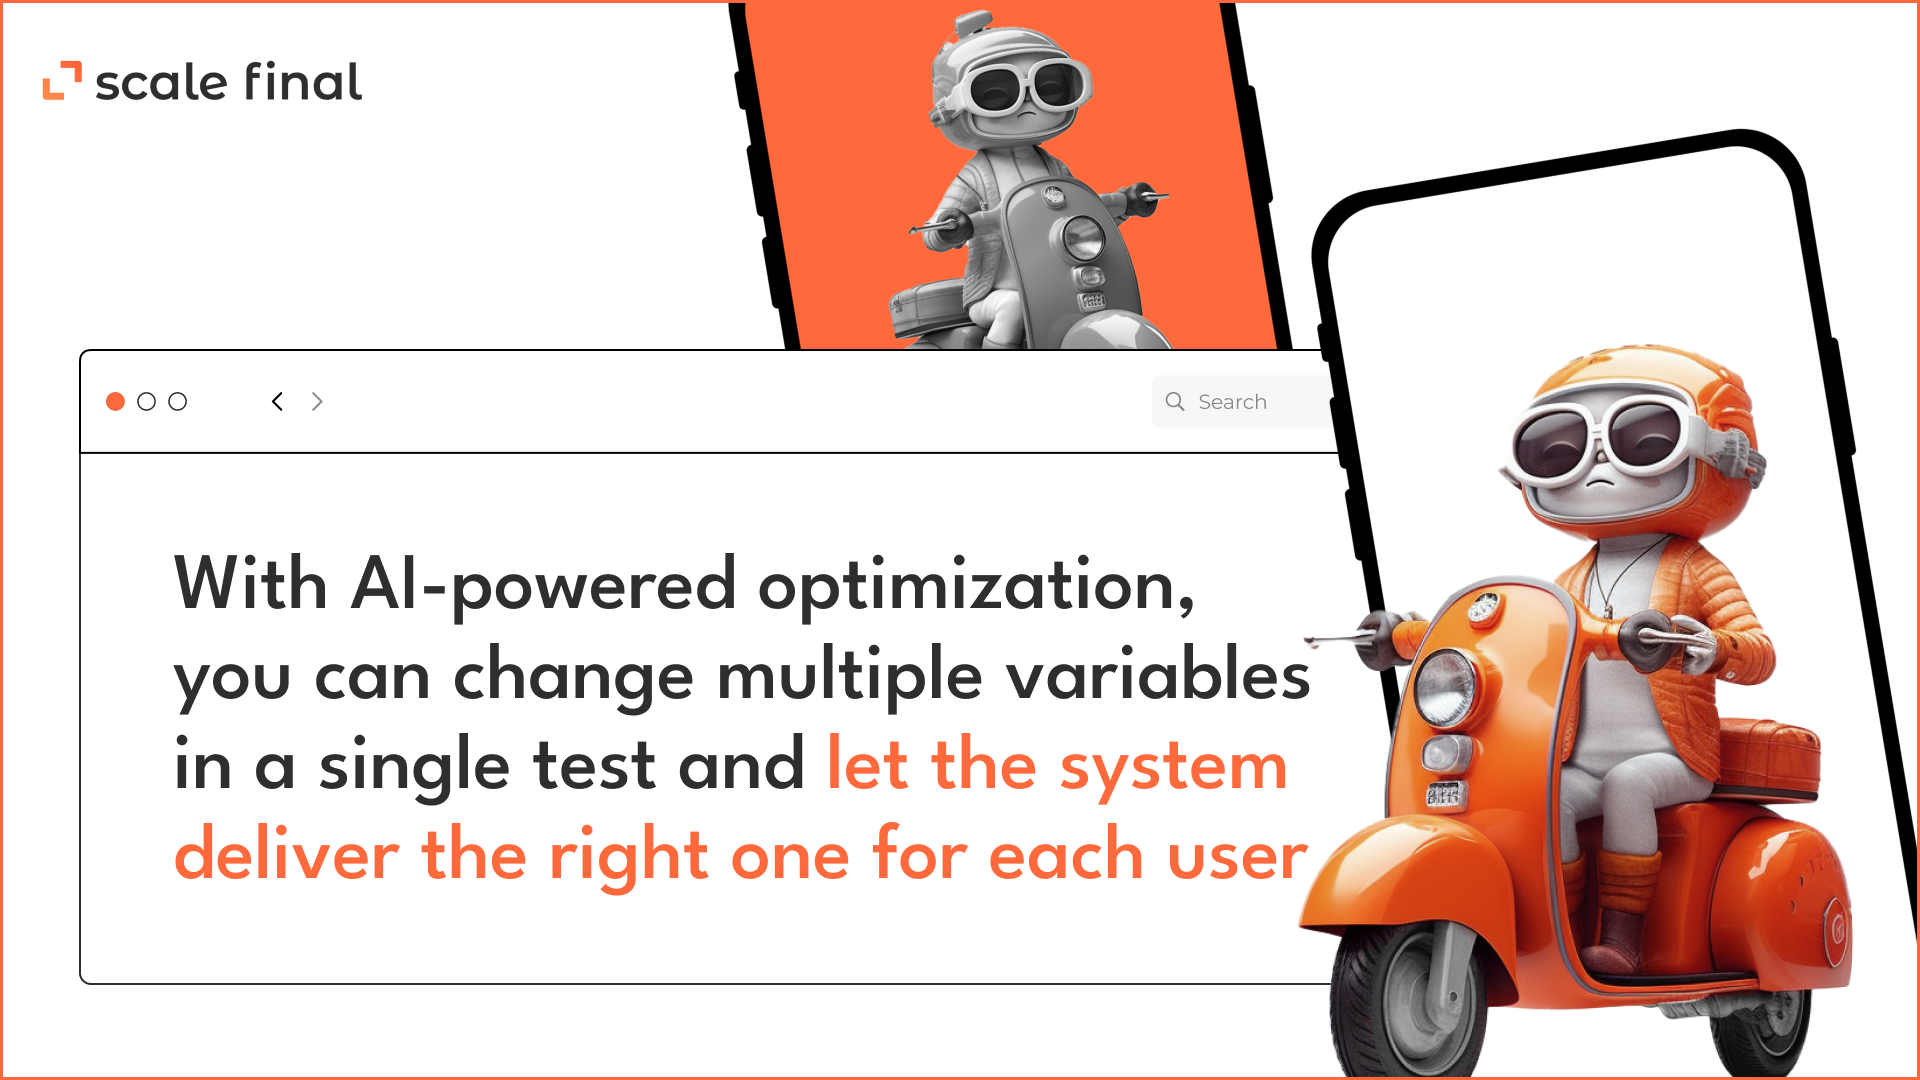 With AI-powered optimization, you can change multiple variables in a single test and let the system deliver the right one for each user.